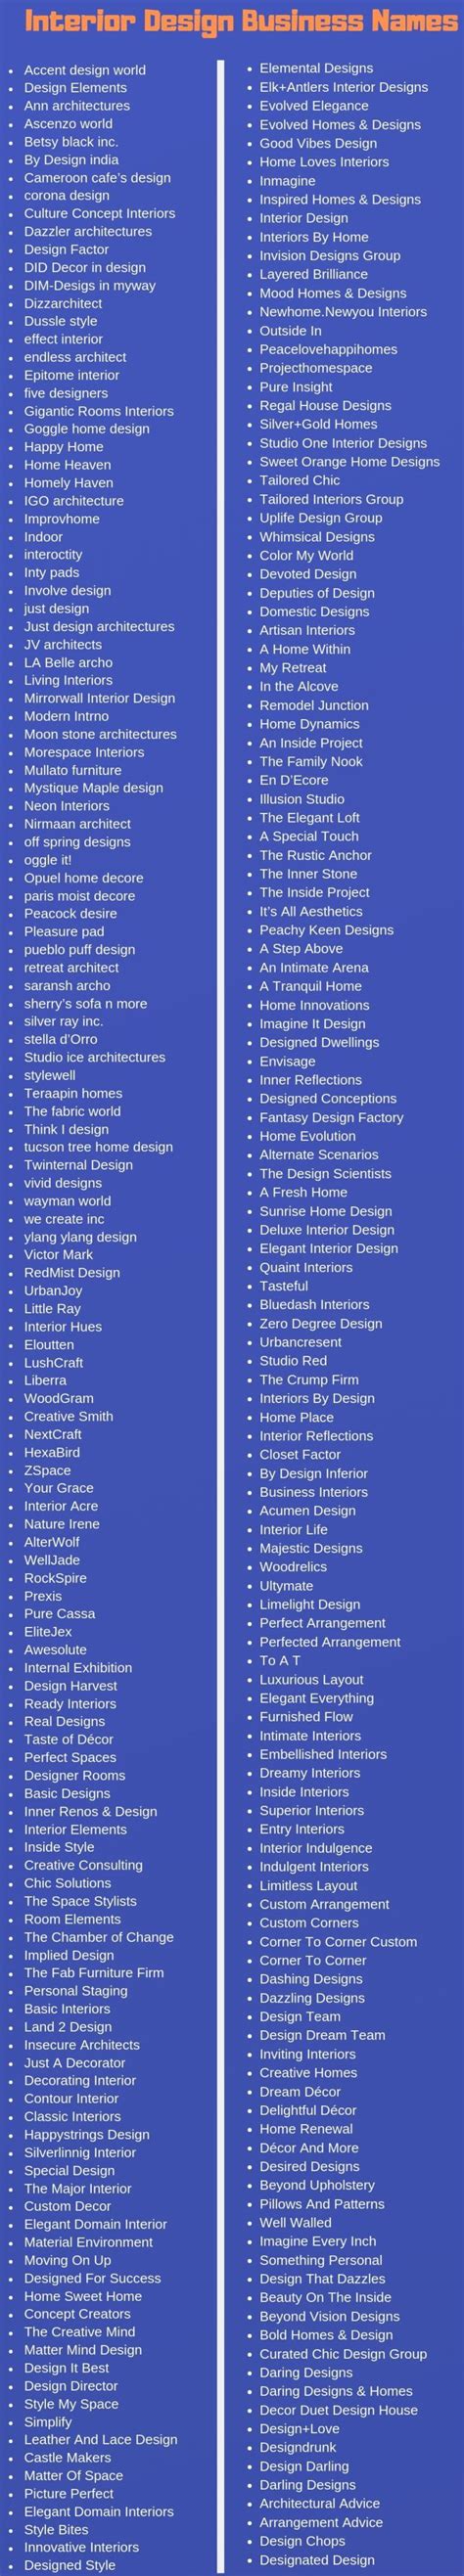 Budget Interior Design Business Names Article By Nicole Martins